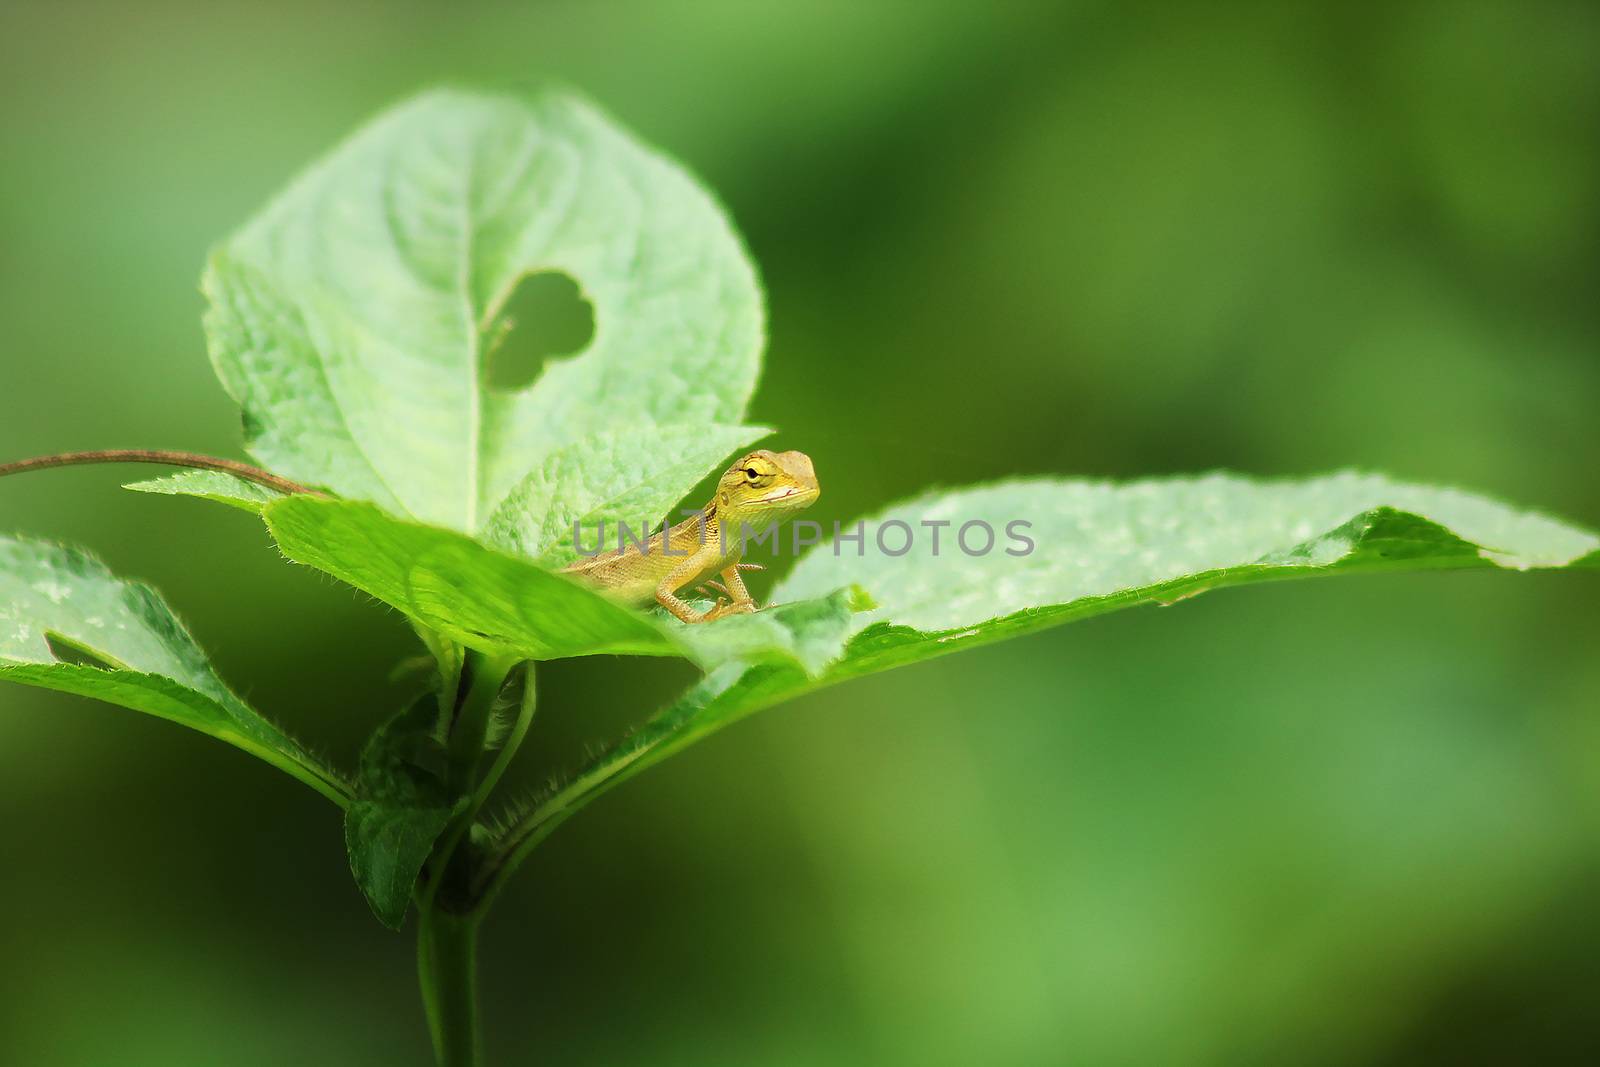 Yellow lizards on the leaves Looking for prey